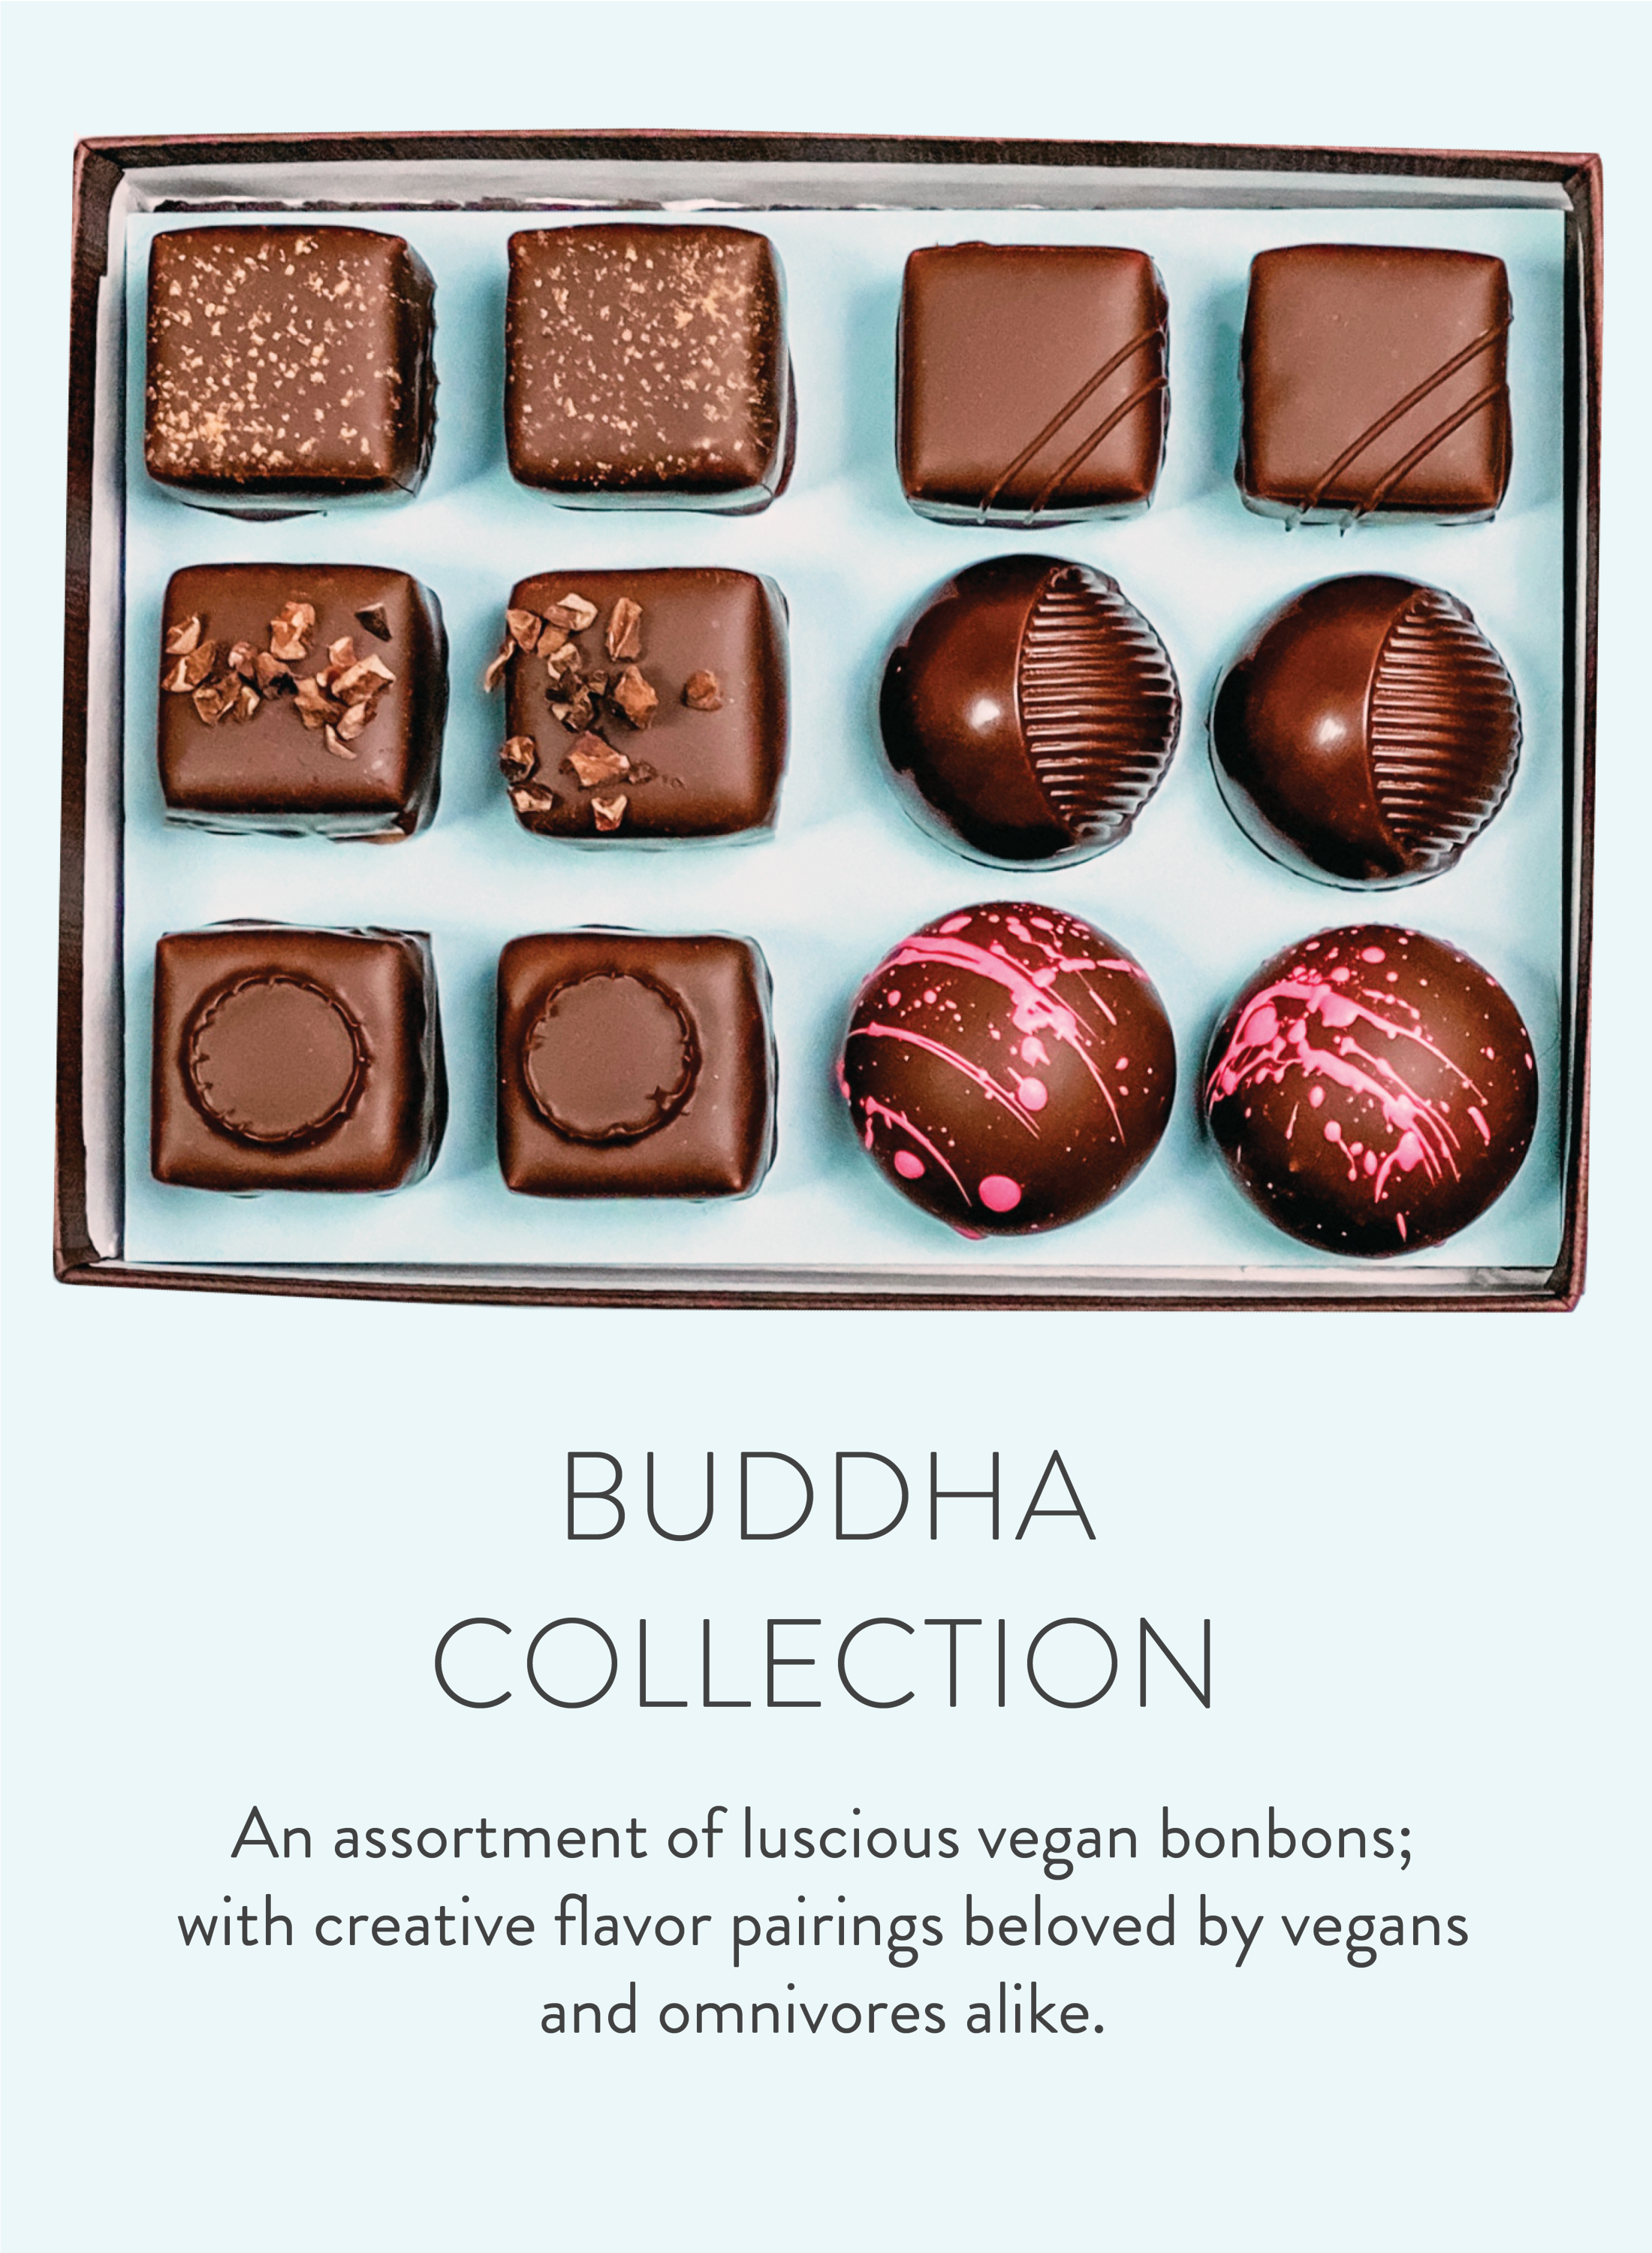 Buddha Collection product page